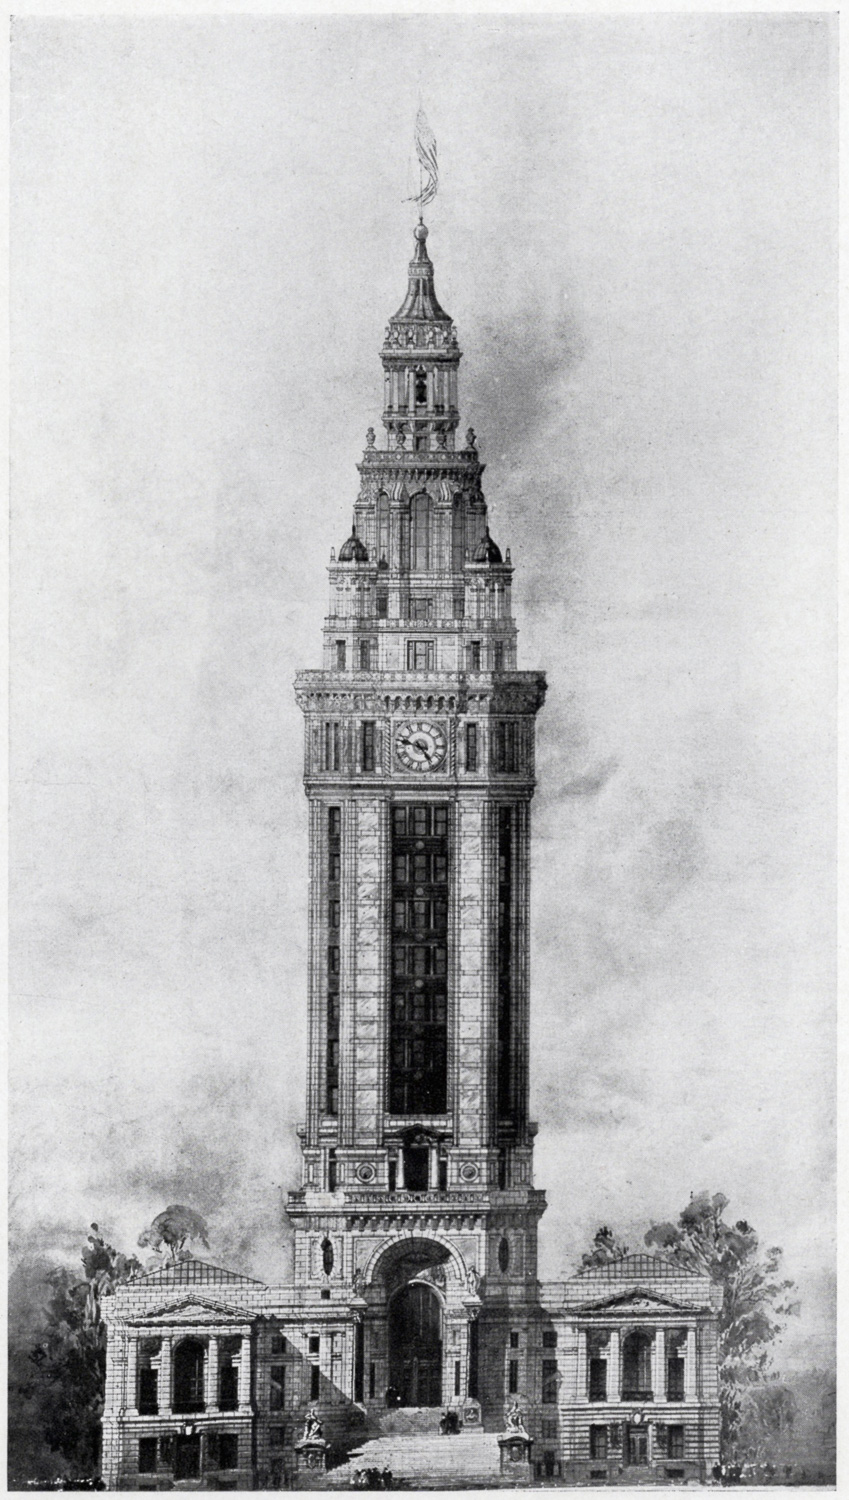 An ornate fifteen-story skyscraper with a symmetrical facade that tapers at the top and has a low wings on either side. A broad staircase leads up to the main entrance of the building which is located at the center of the base of the tower under a large rounded arch. The drawing shows each of the large blocks of stone the building is made of. One either side of the central tower are small, two-story wings topped by pediments (low pitched roofs shaped like triangles). The main body of the tower rises eight stories above the entrance levels and is plain in comparison to the rest of the building. Above that the floors of the tower diminish gradually until they reach a flagpole and flag at the top. This top portion of the tower is decorated in classical details like small columns, vases, and arches.